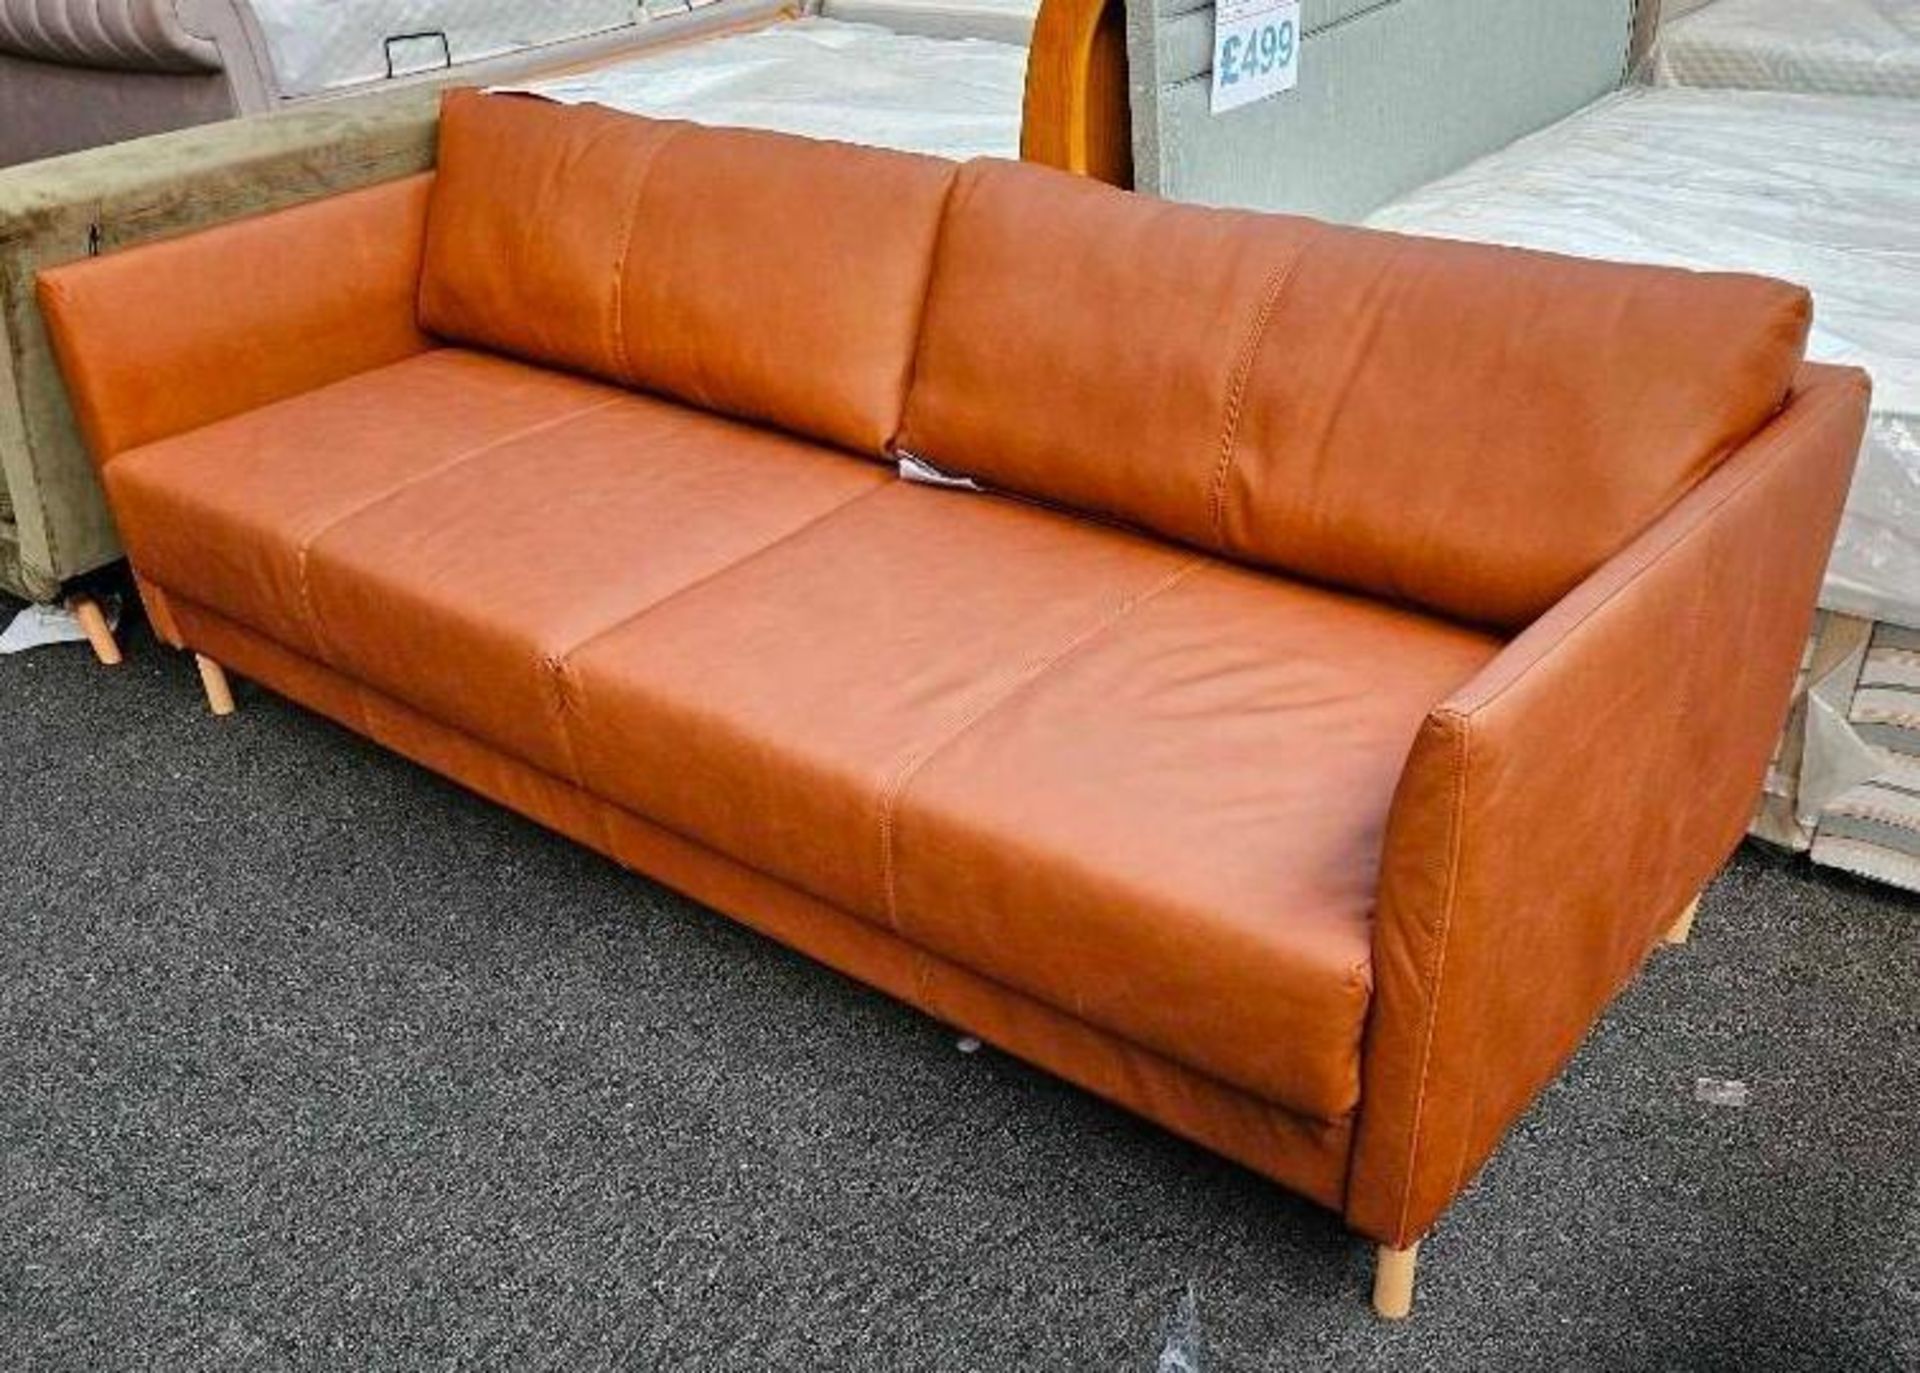 *EX DISPLAY* Habitat Extra large Hide leather sofa bed in Tan colour.